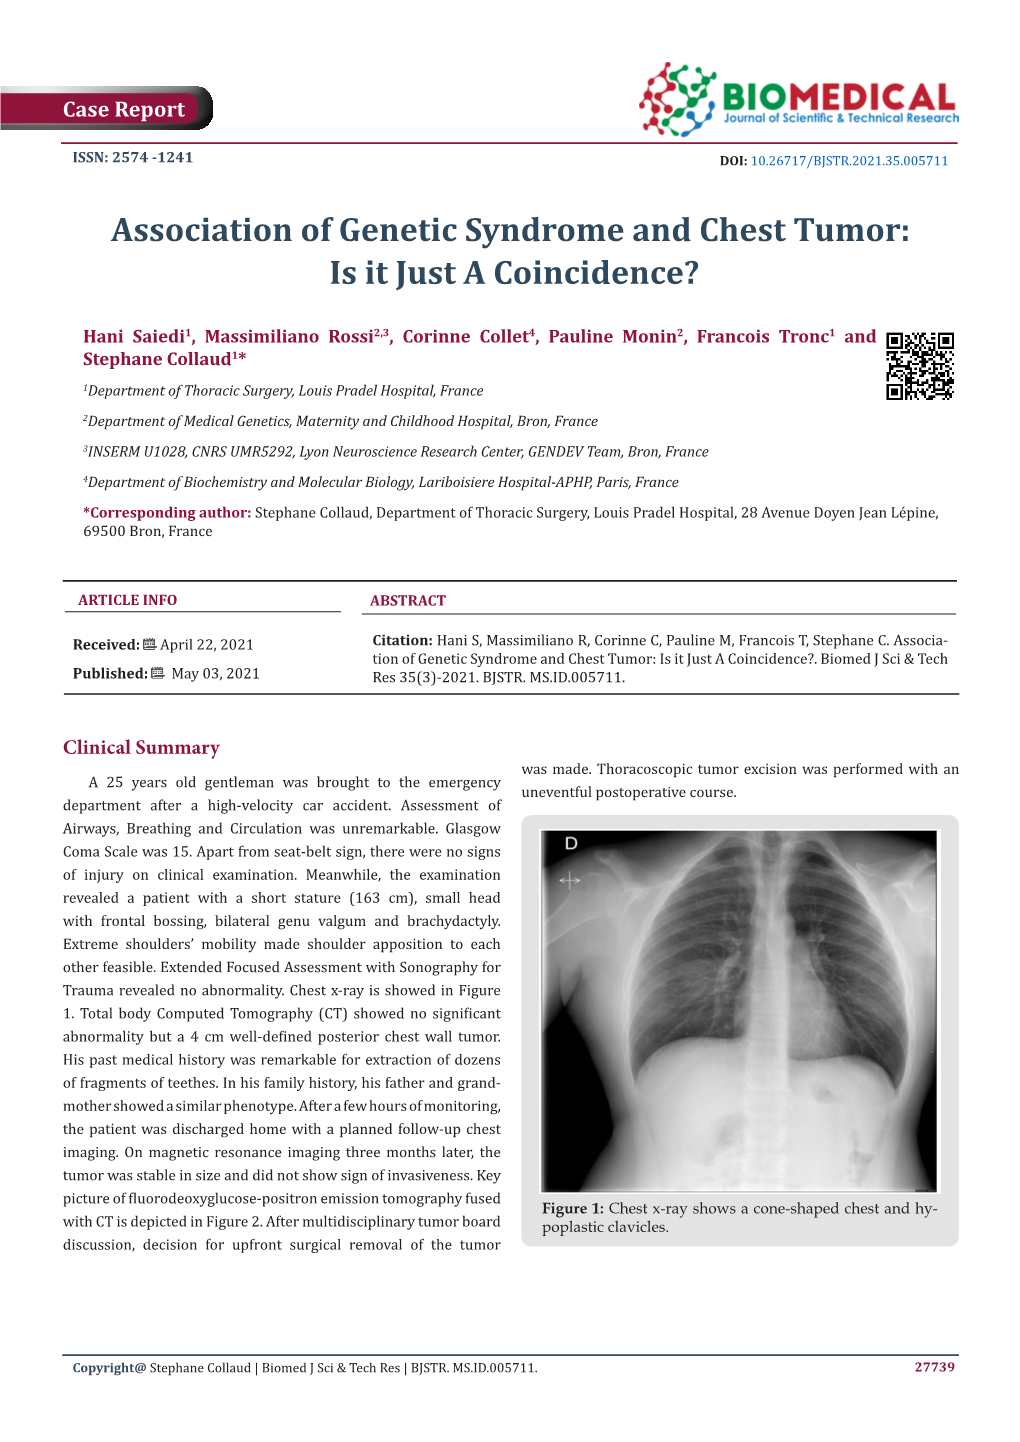 Association of Genetic Syndrome and Chest Tumor: Is It Just a Coincidence?